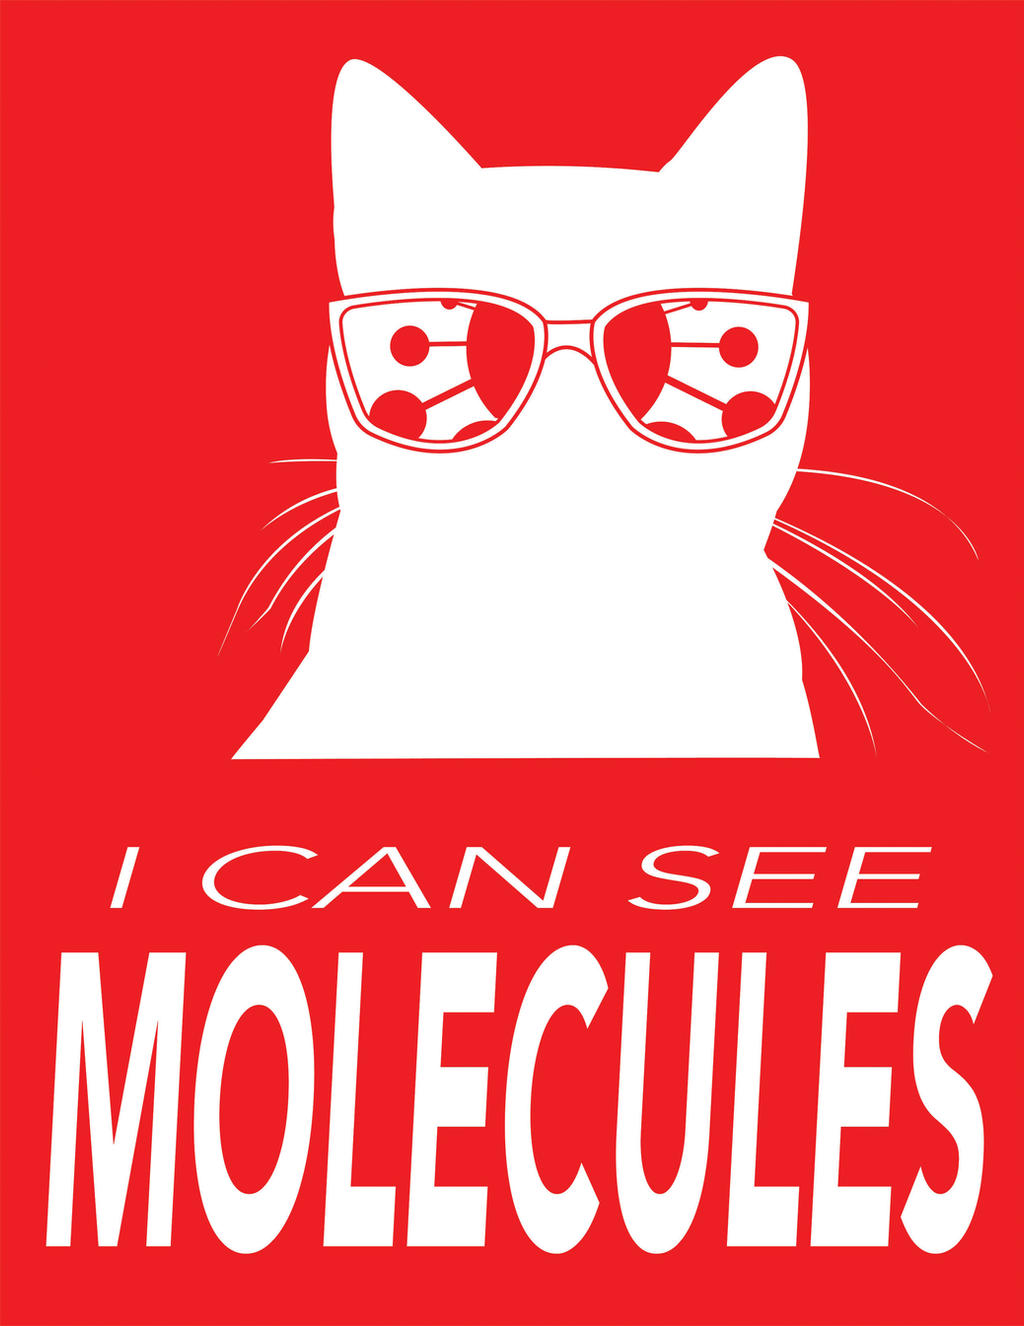 I can see MOLECULES